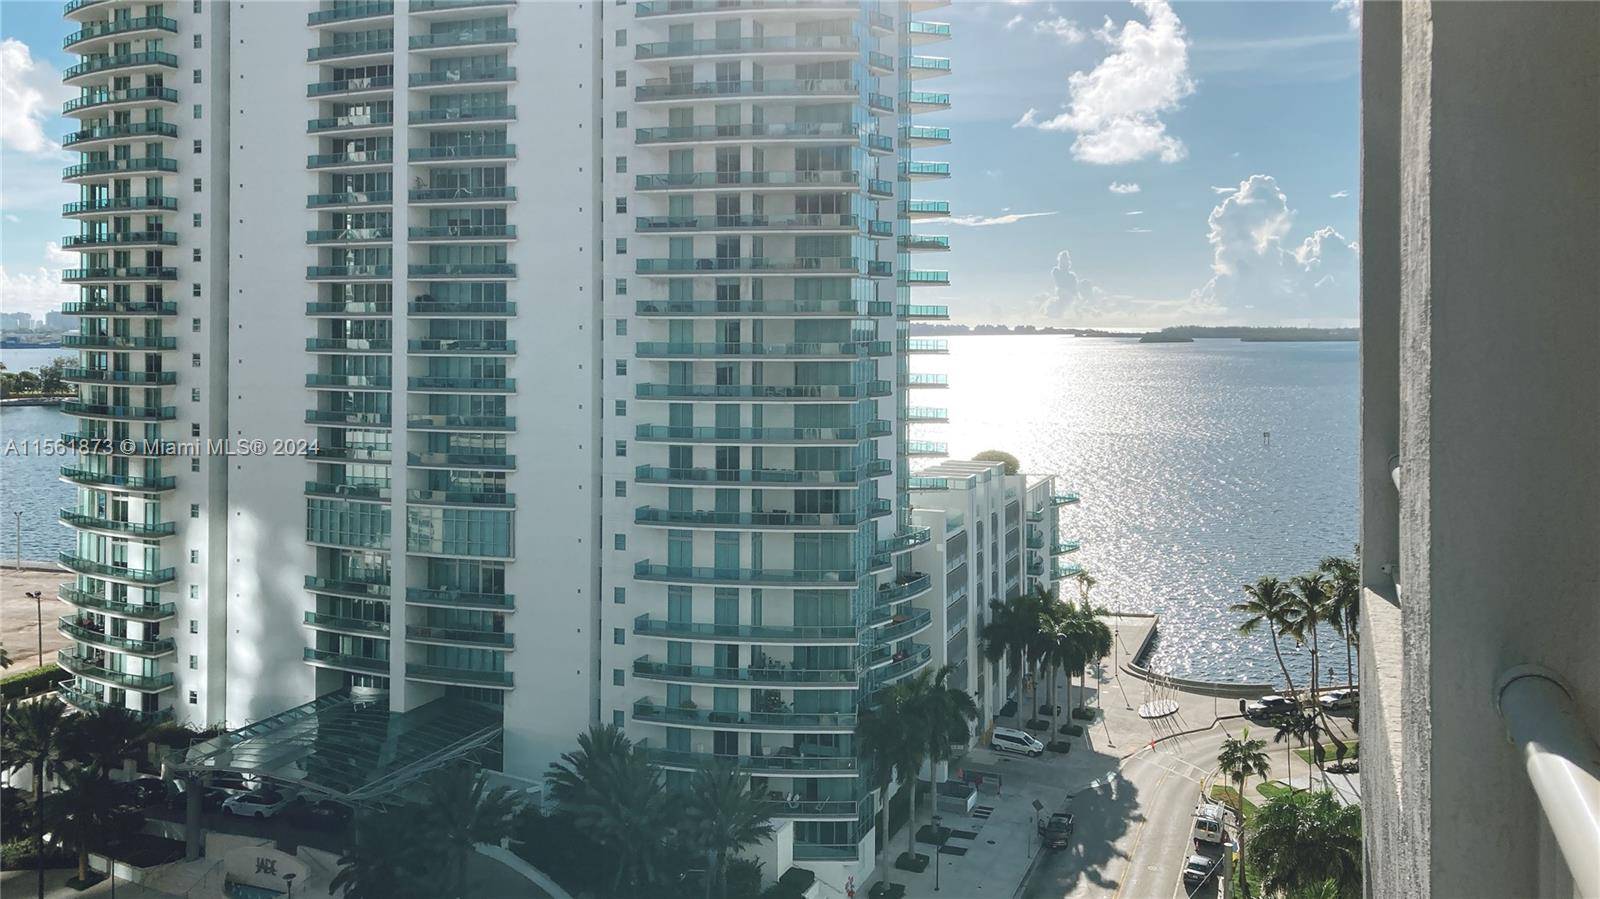 Charming 2 bed, 2 bath residence at The Sail with ample space and a generously sized balcony perfect for alfresco meals in Brickell's bustling center, boasting a roomy terrace and ...